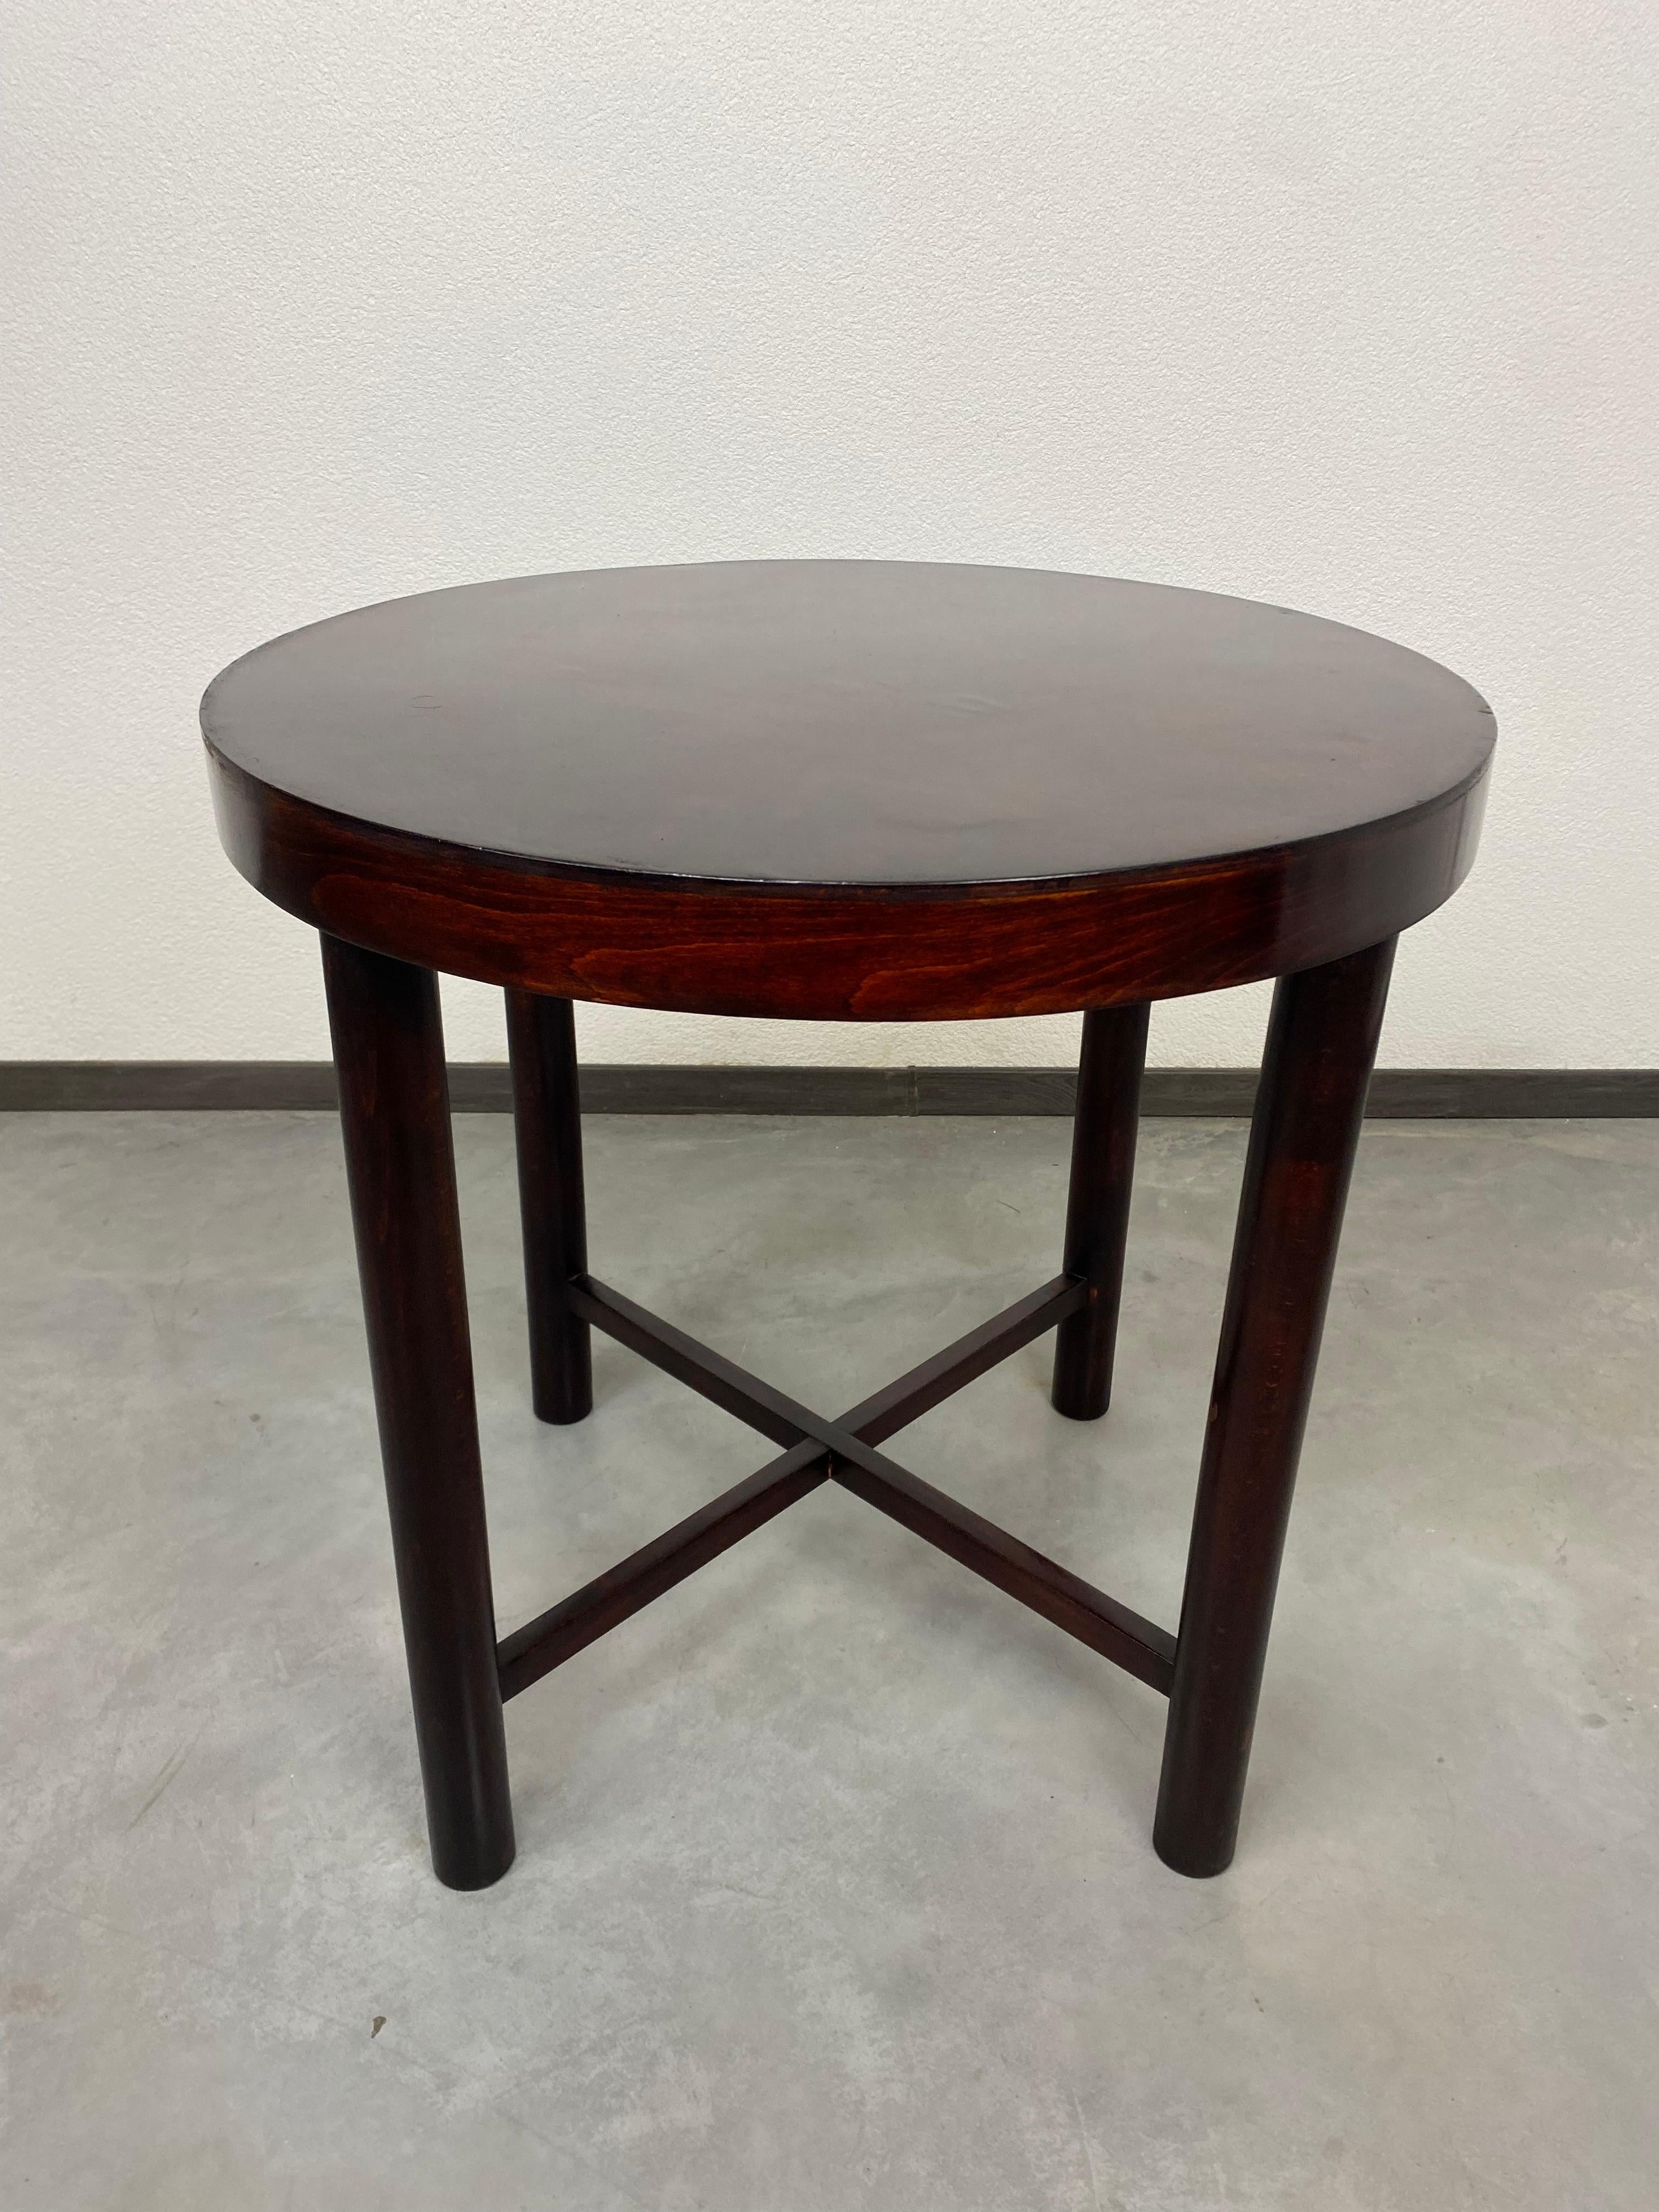 Round coffee table by Thonet Mundus circa 1930. Professionally stained and repolished.